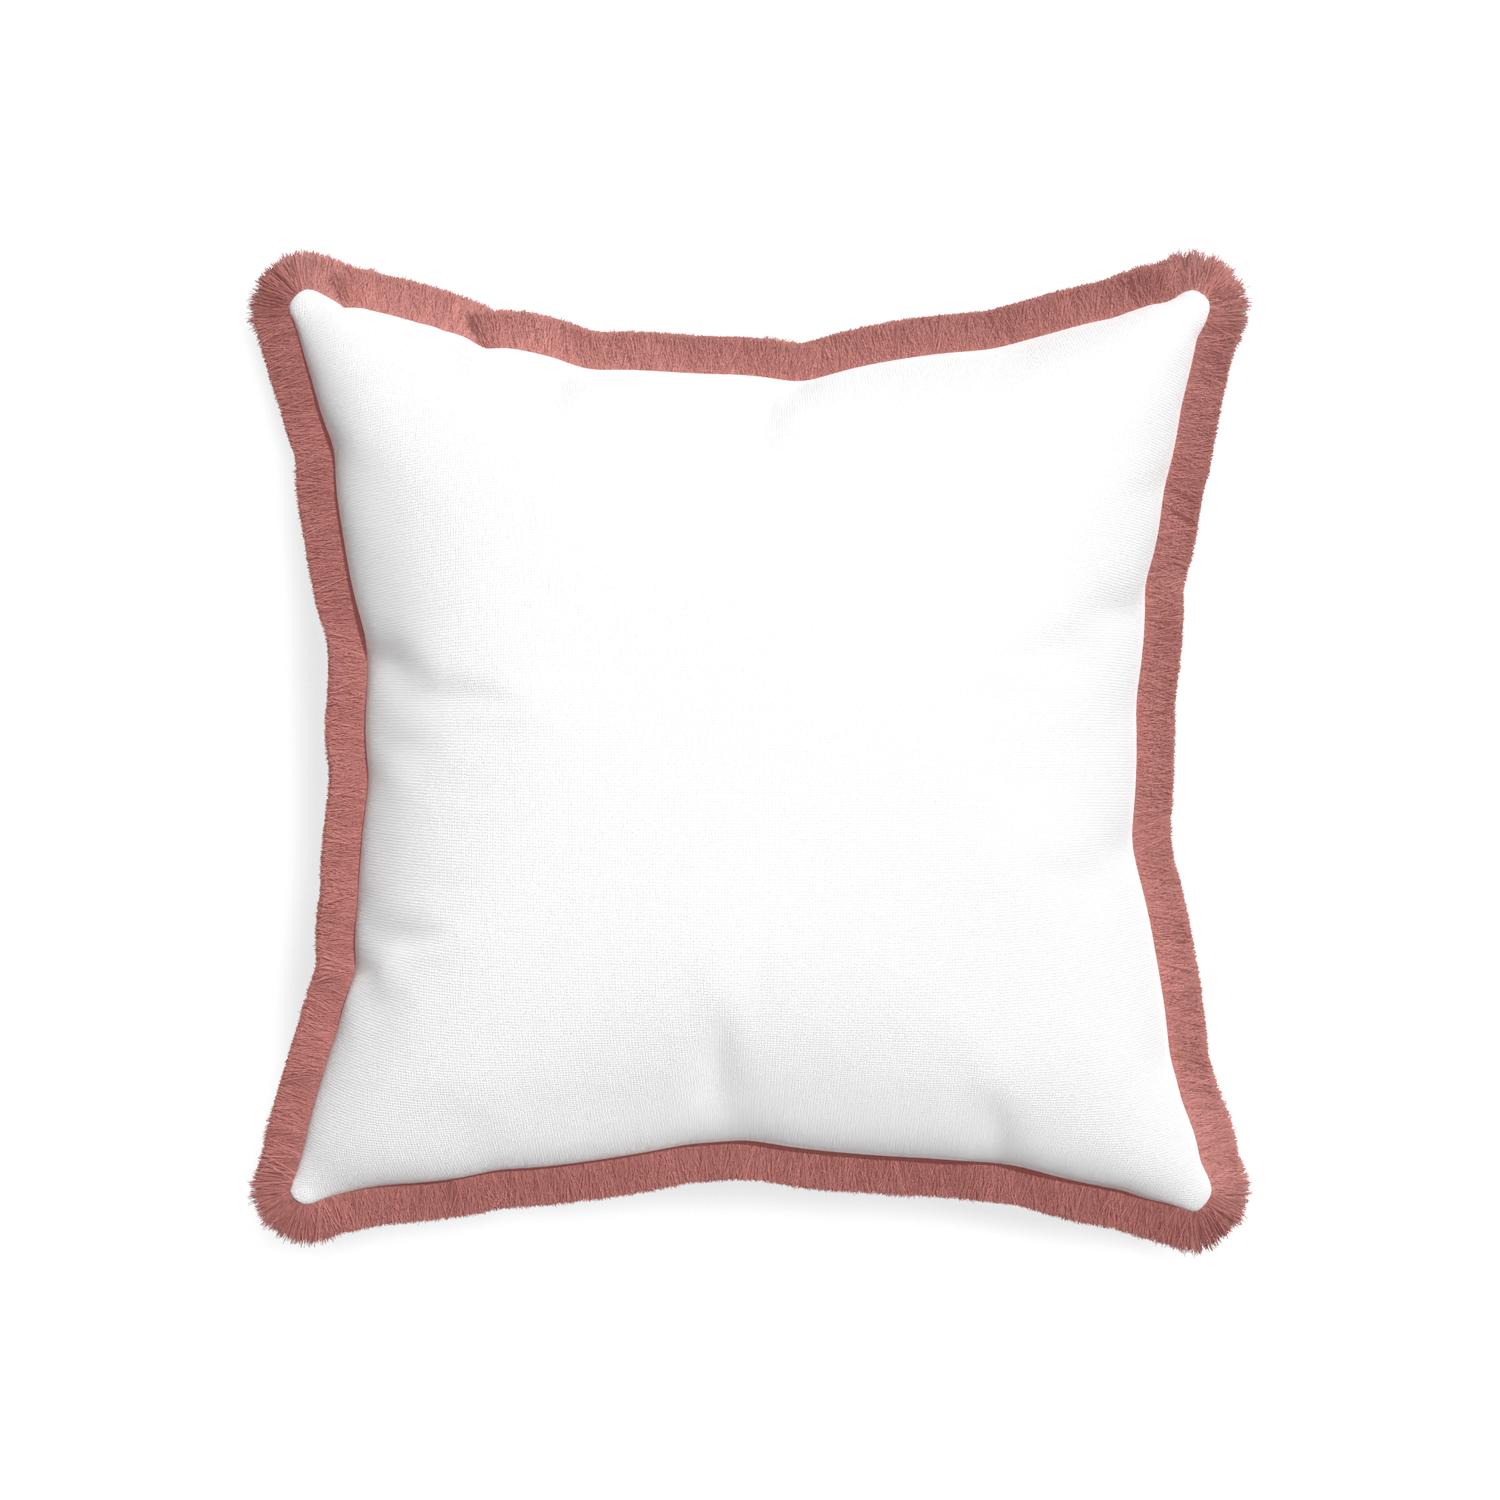 20-square snow custom white cottonpillow with d fringe on white background